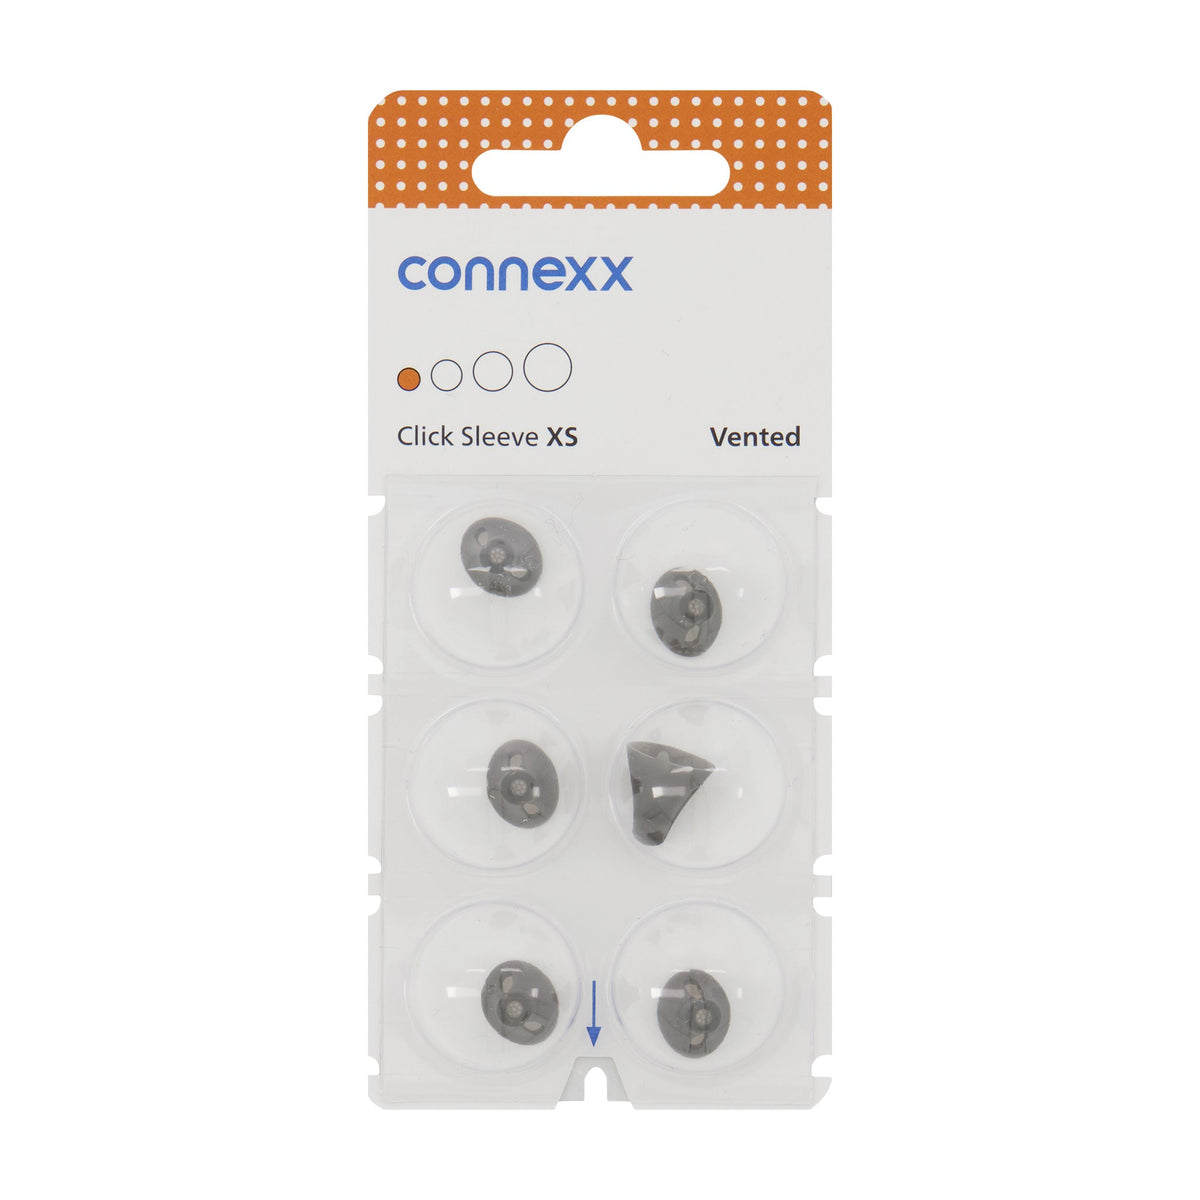 Connexx Click Sleeve XS Vented